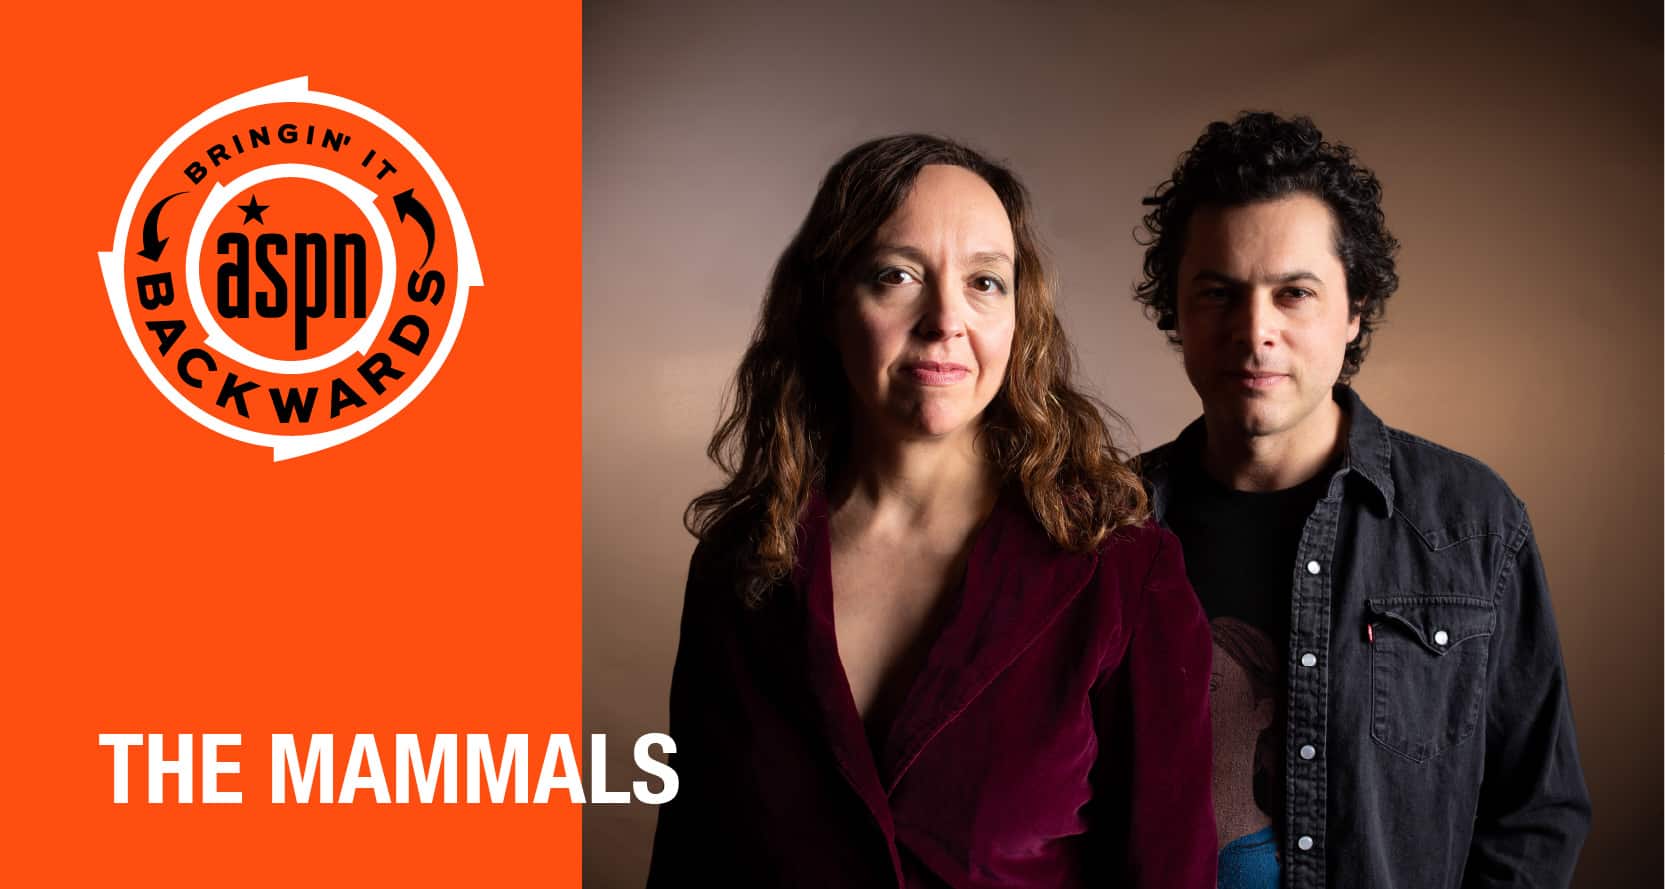 Bringin’ it Backwards: Interview with The Mammals